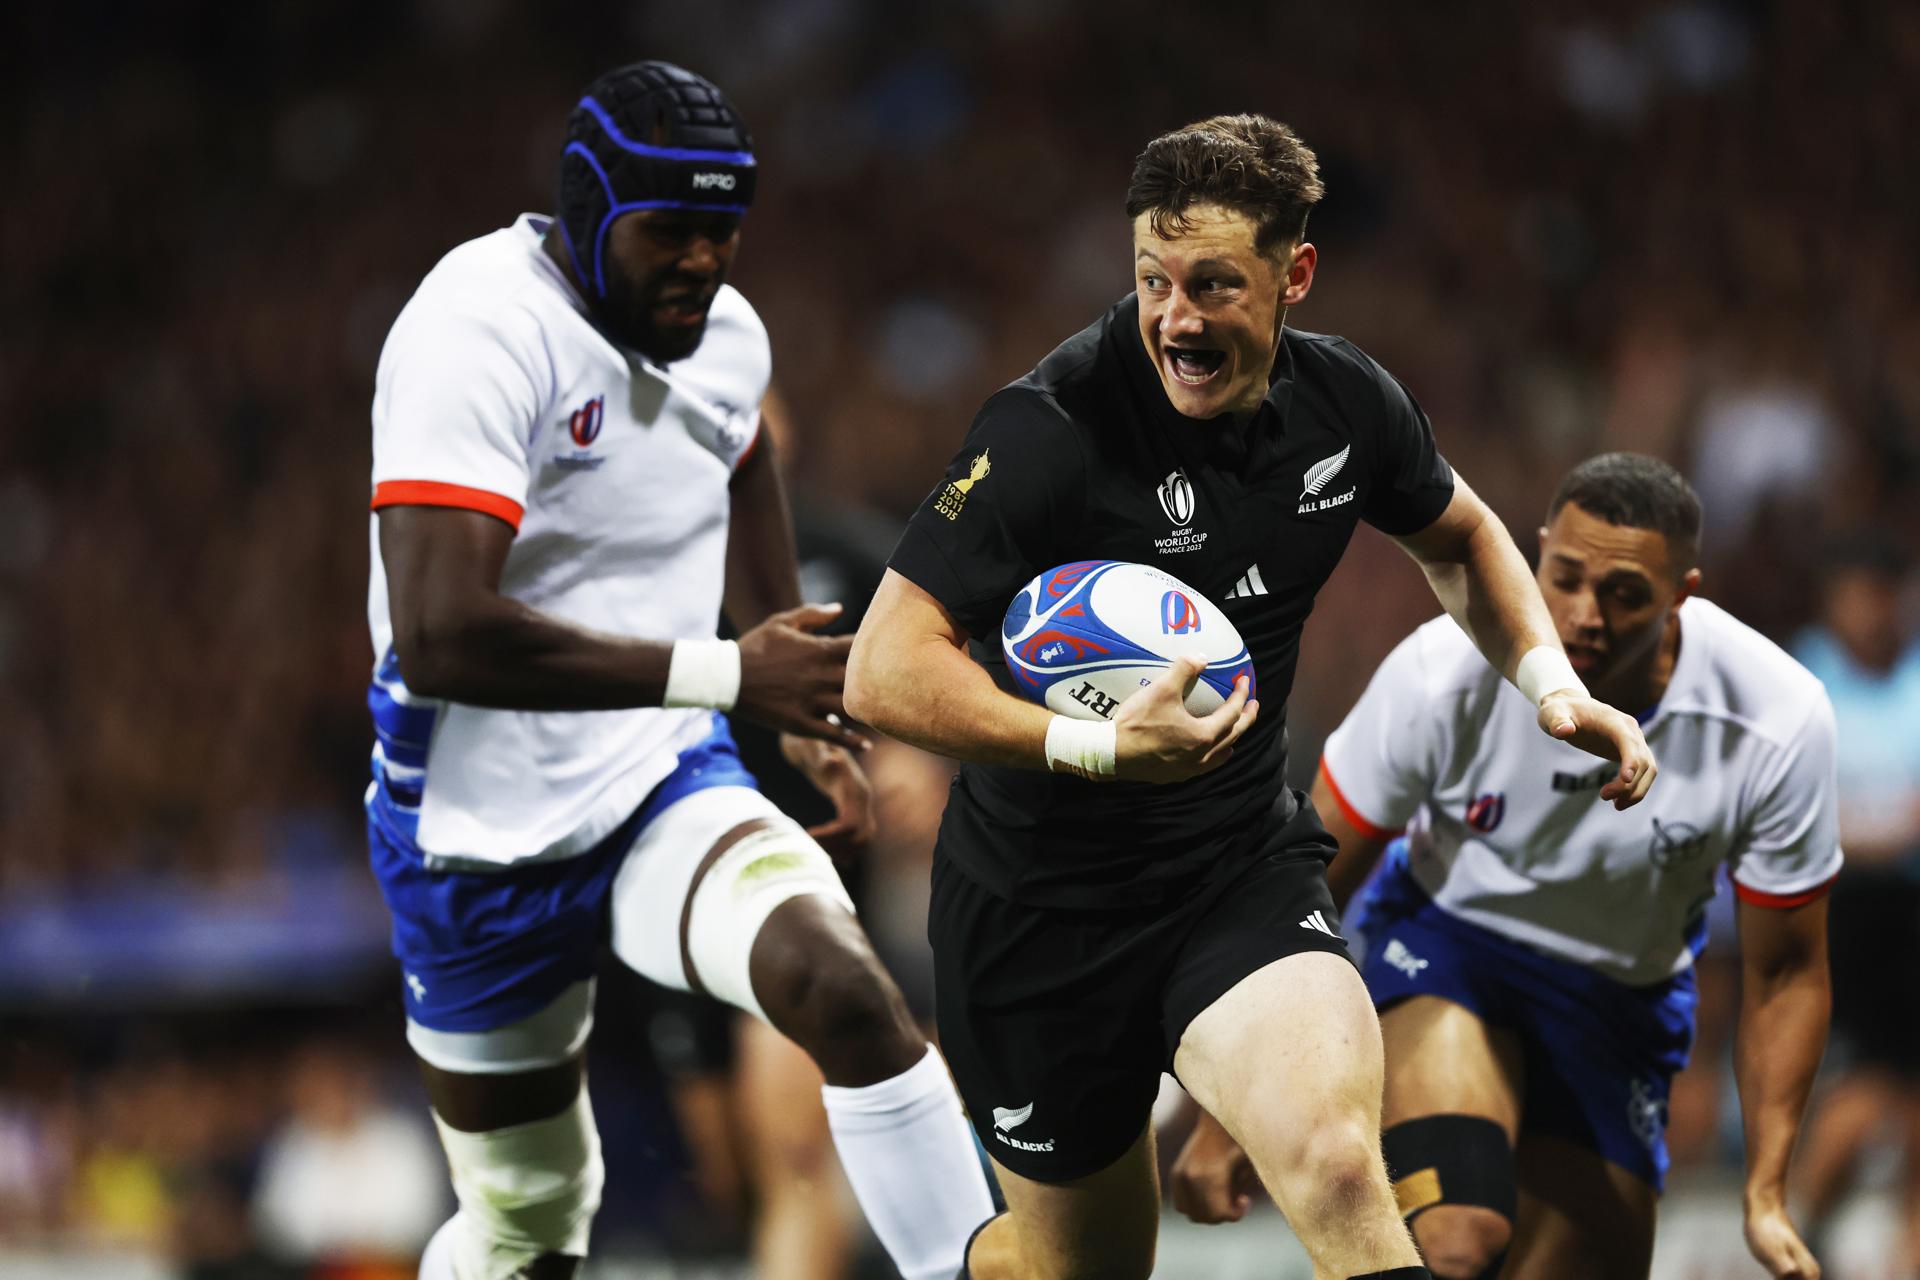 New Zealand's Cam Roigard (R) in action during the Rugby World Cup Pool A match between New Zealand and Namibia in Toulouse, France, 15 September 2023. EFE-EPA/GUILLAUME HORCAJUELO